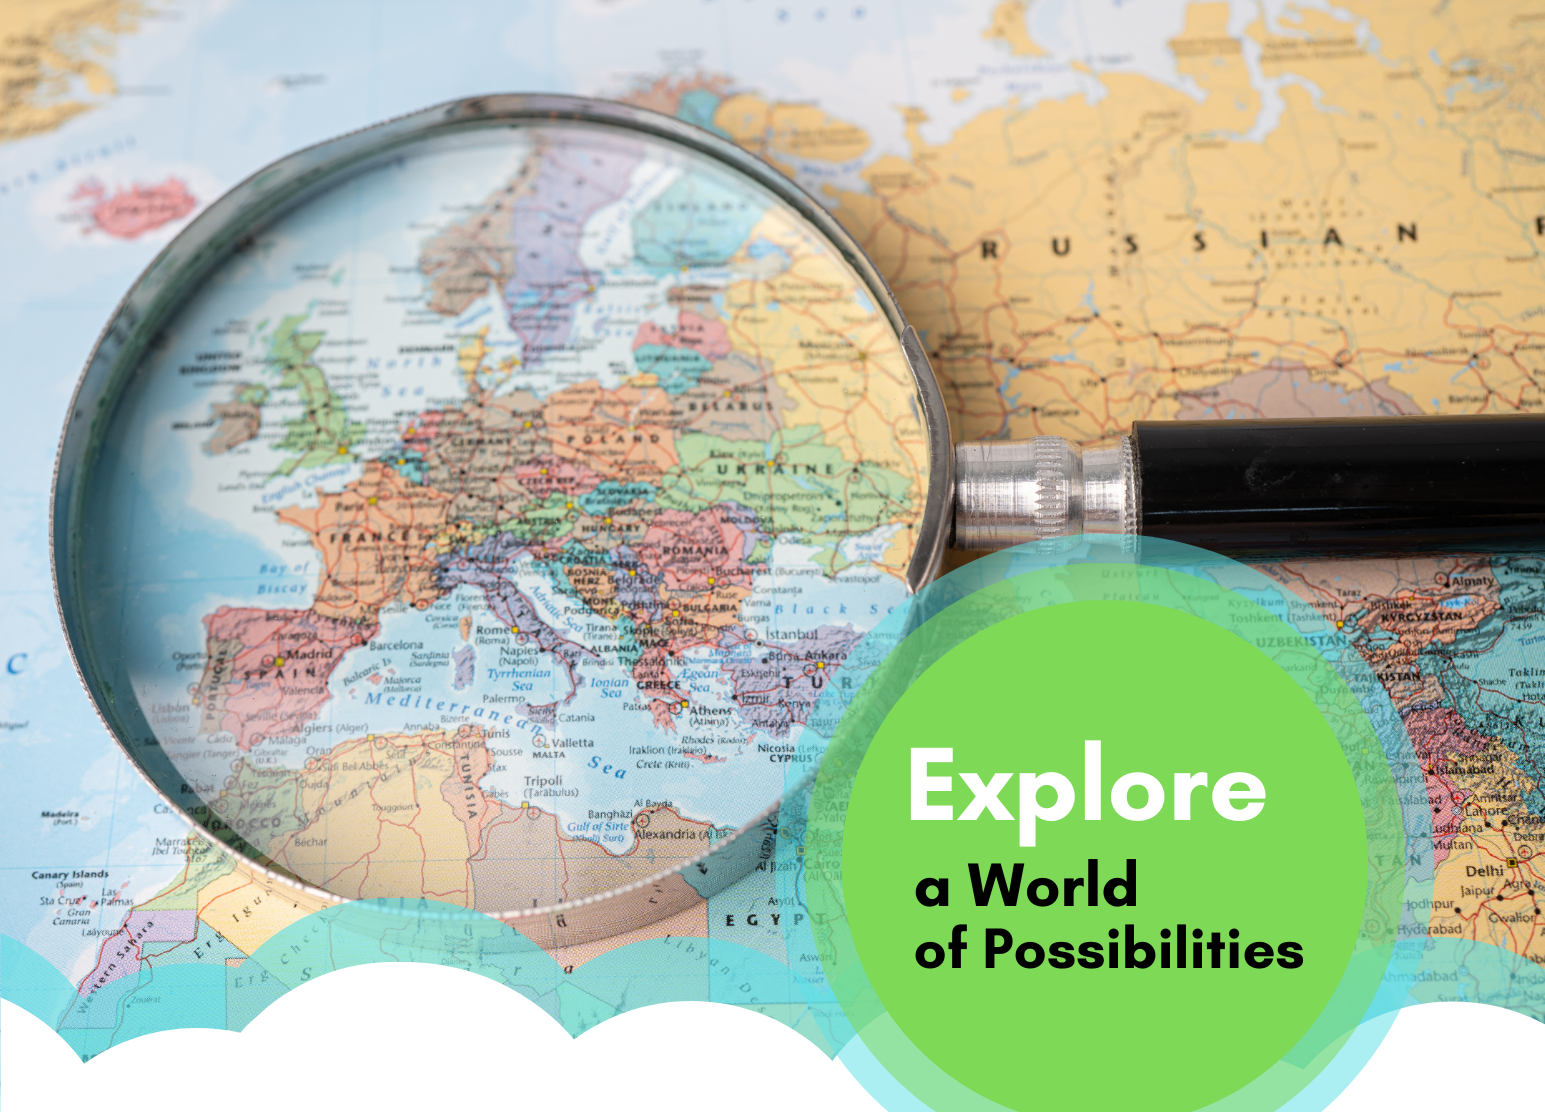 "Explore a World of Possibilities" on map with magnifying glass